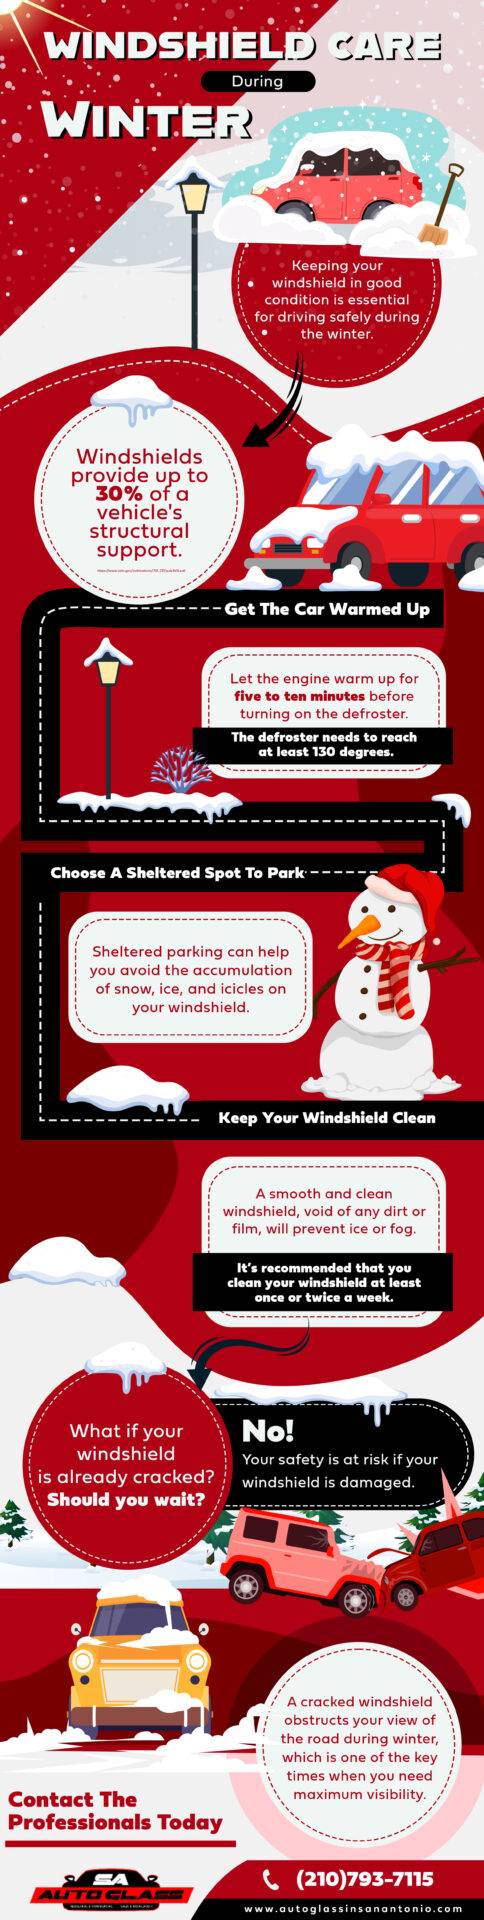 Wind shield care during winter 